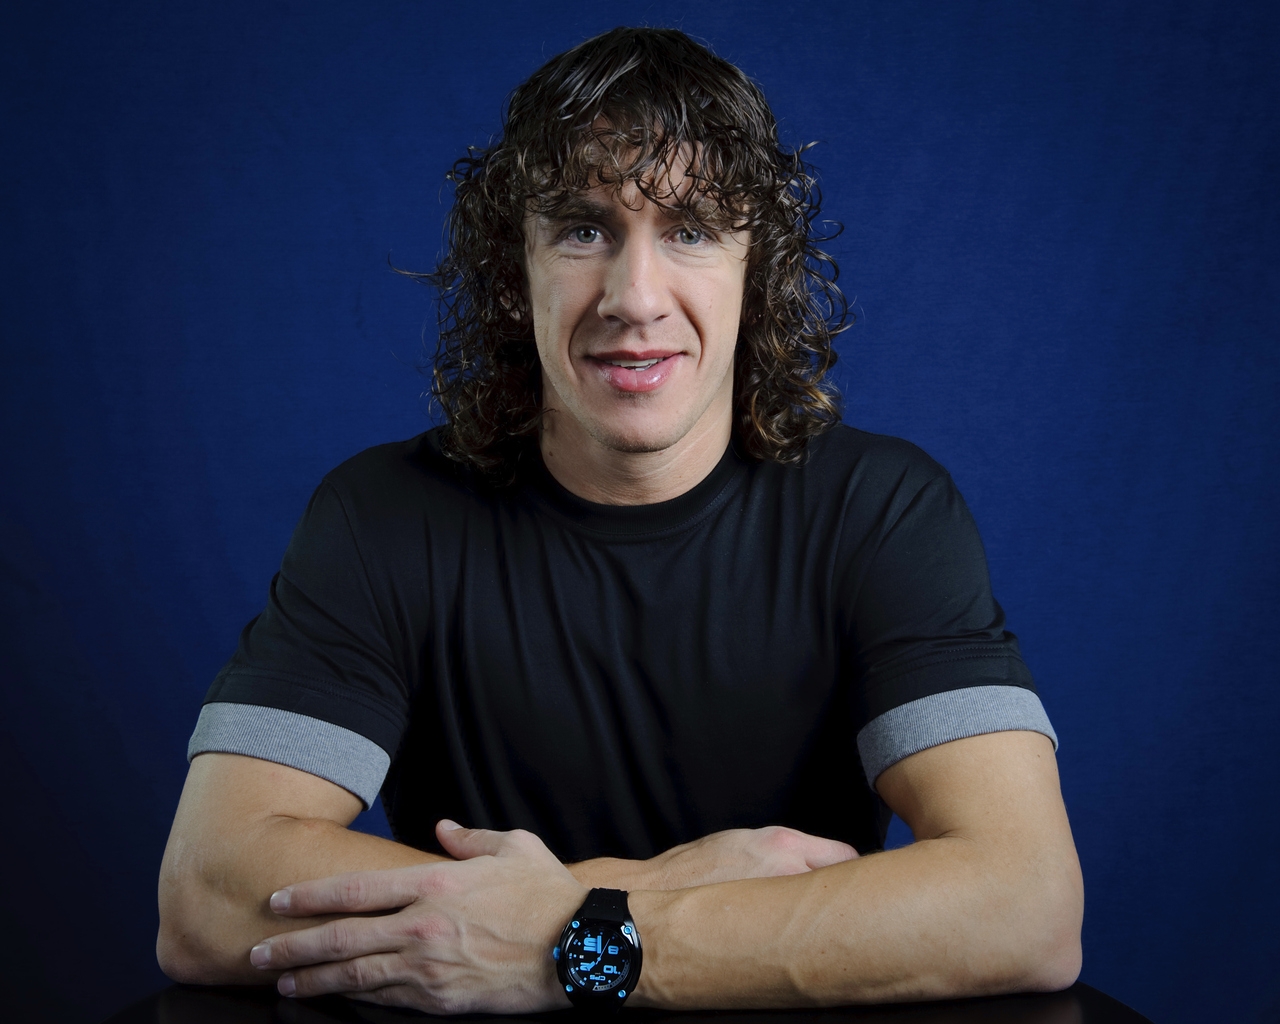 Carles Puyol Smile for 1280 x 1024 resolution